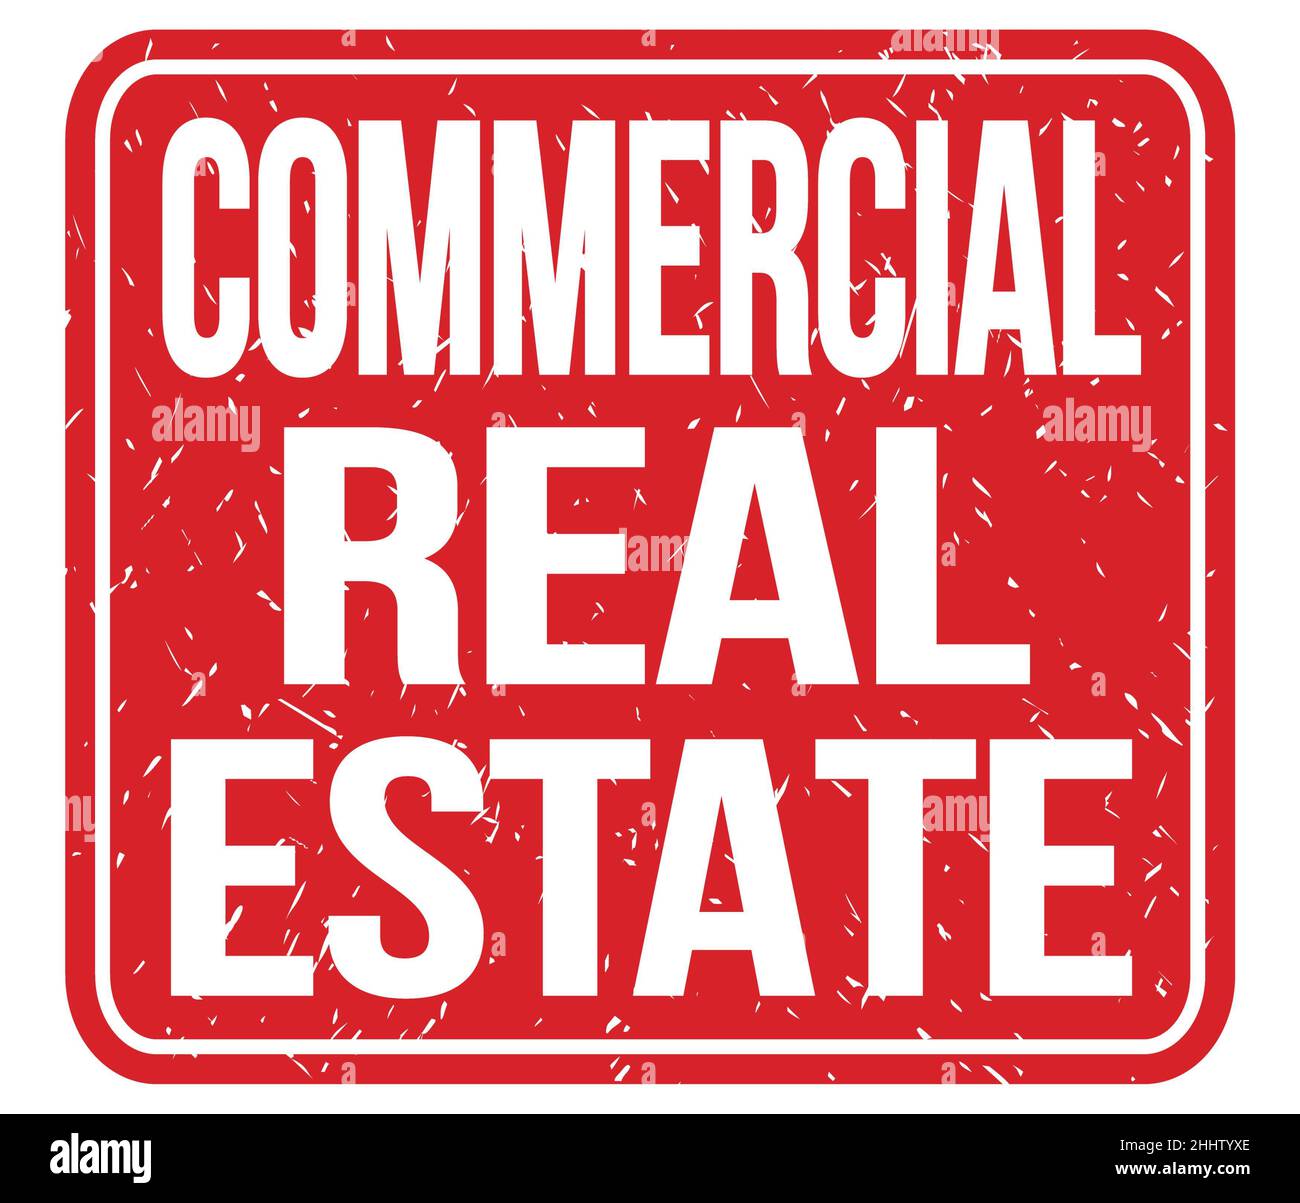 COMMERCIAL REAL ESTATE, text written on red stamp sign Stock Photo